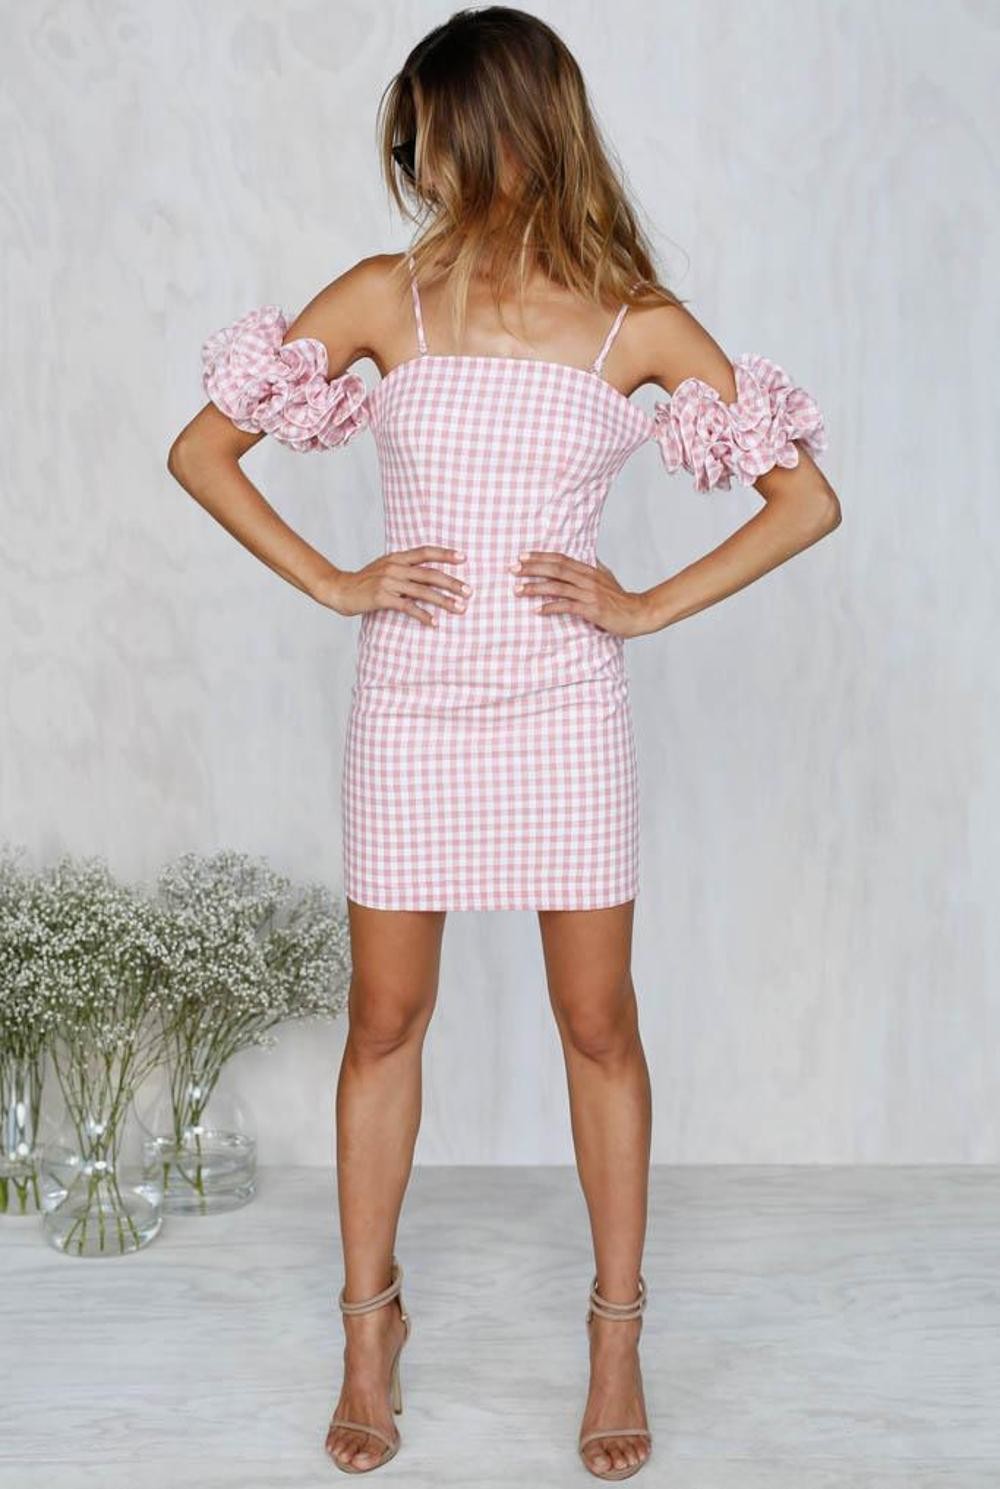 Quality 2018 New Arrivals Clothing Ruffled Sleeve Pink Gingham Women Dresses Summer wholesale